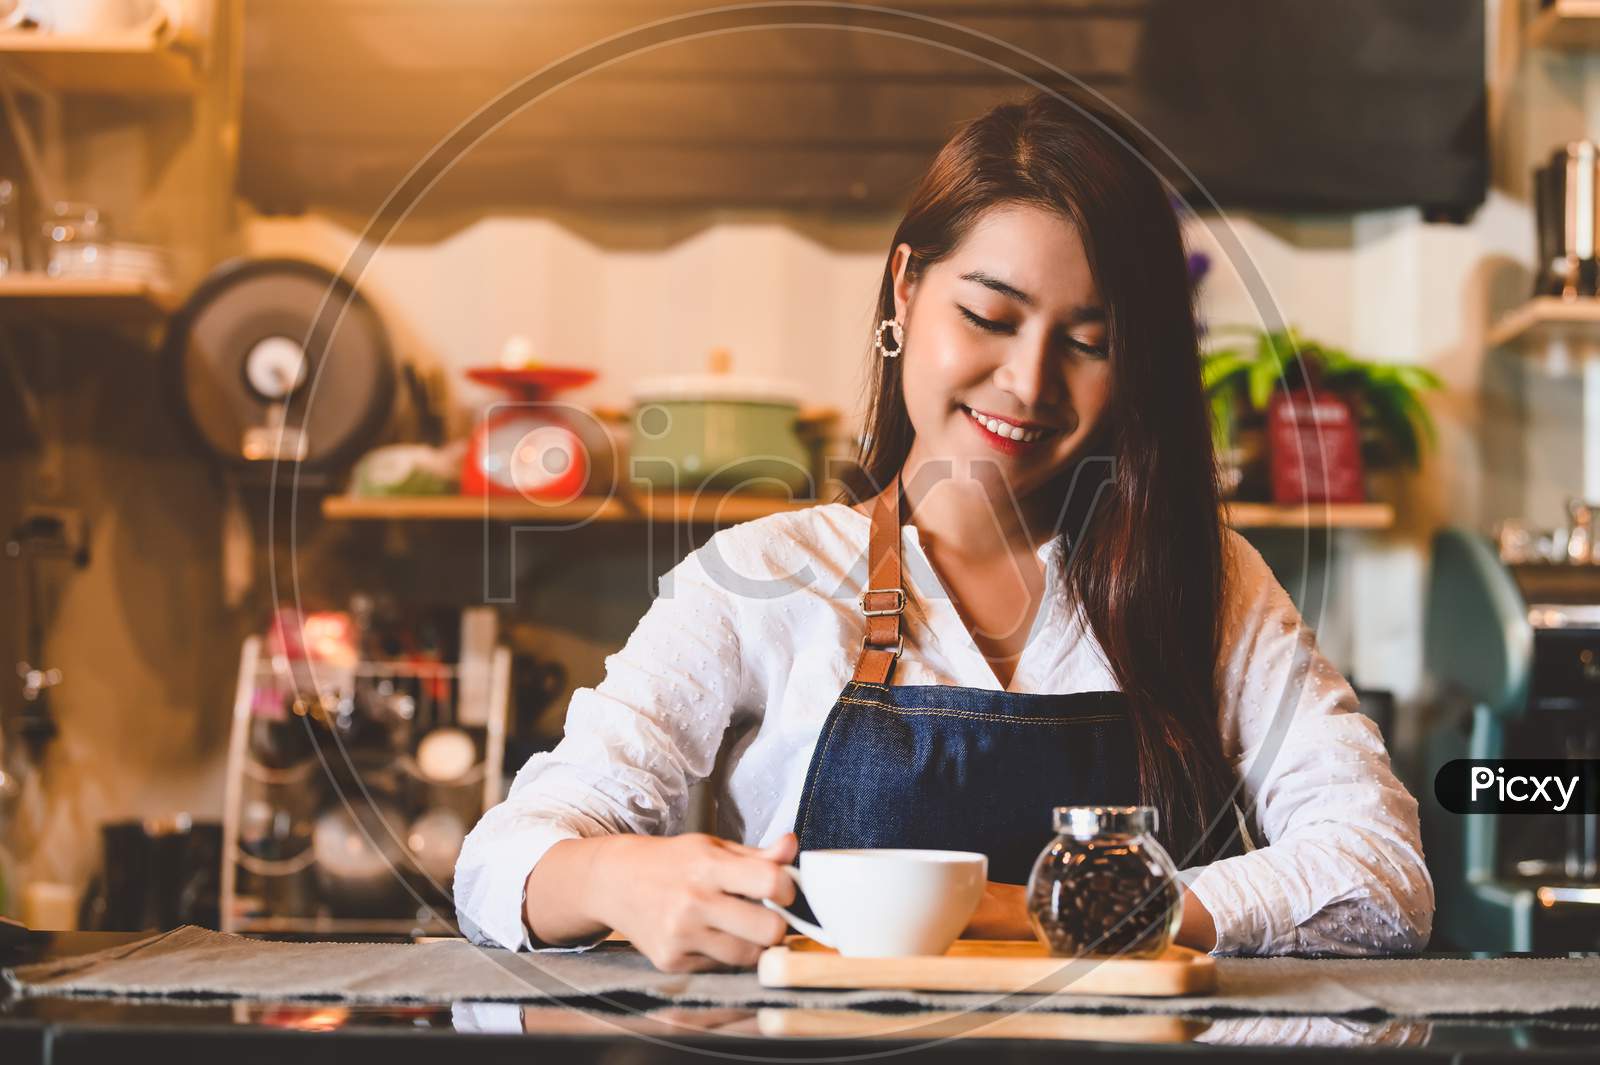 Asian Female Barista Making Cup Of Coffee. Young Woman Holding White Coffee Cup While Standing Behind Cafe Counter Bar In Restaurant Background. People Lifestyles And Business Occupation Concept.